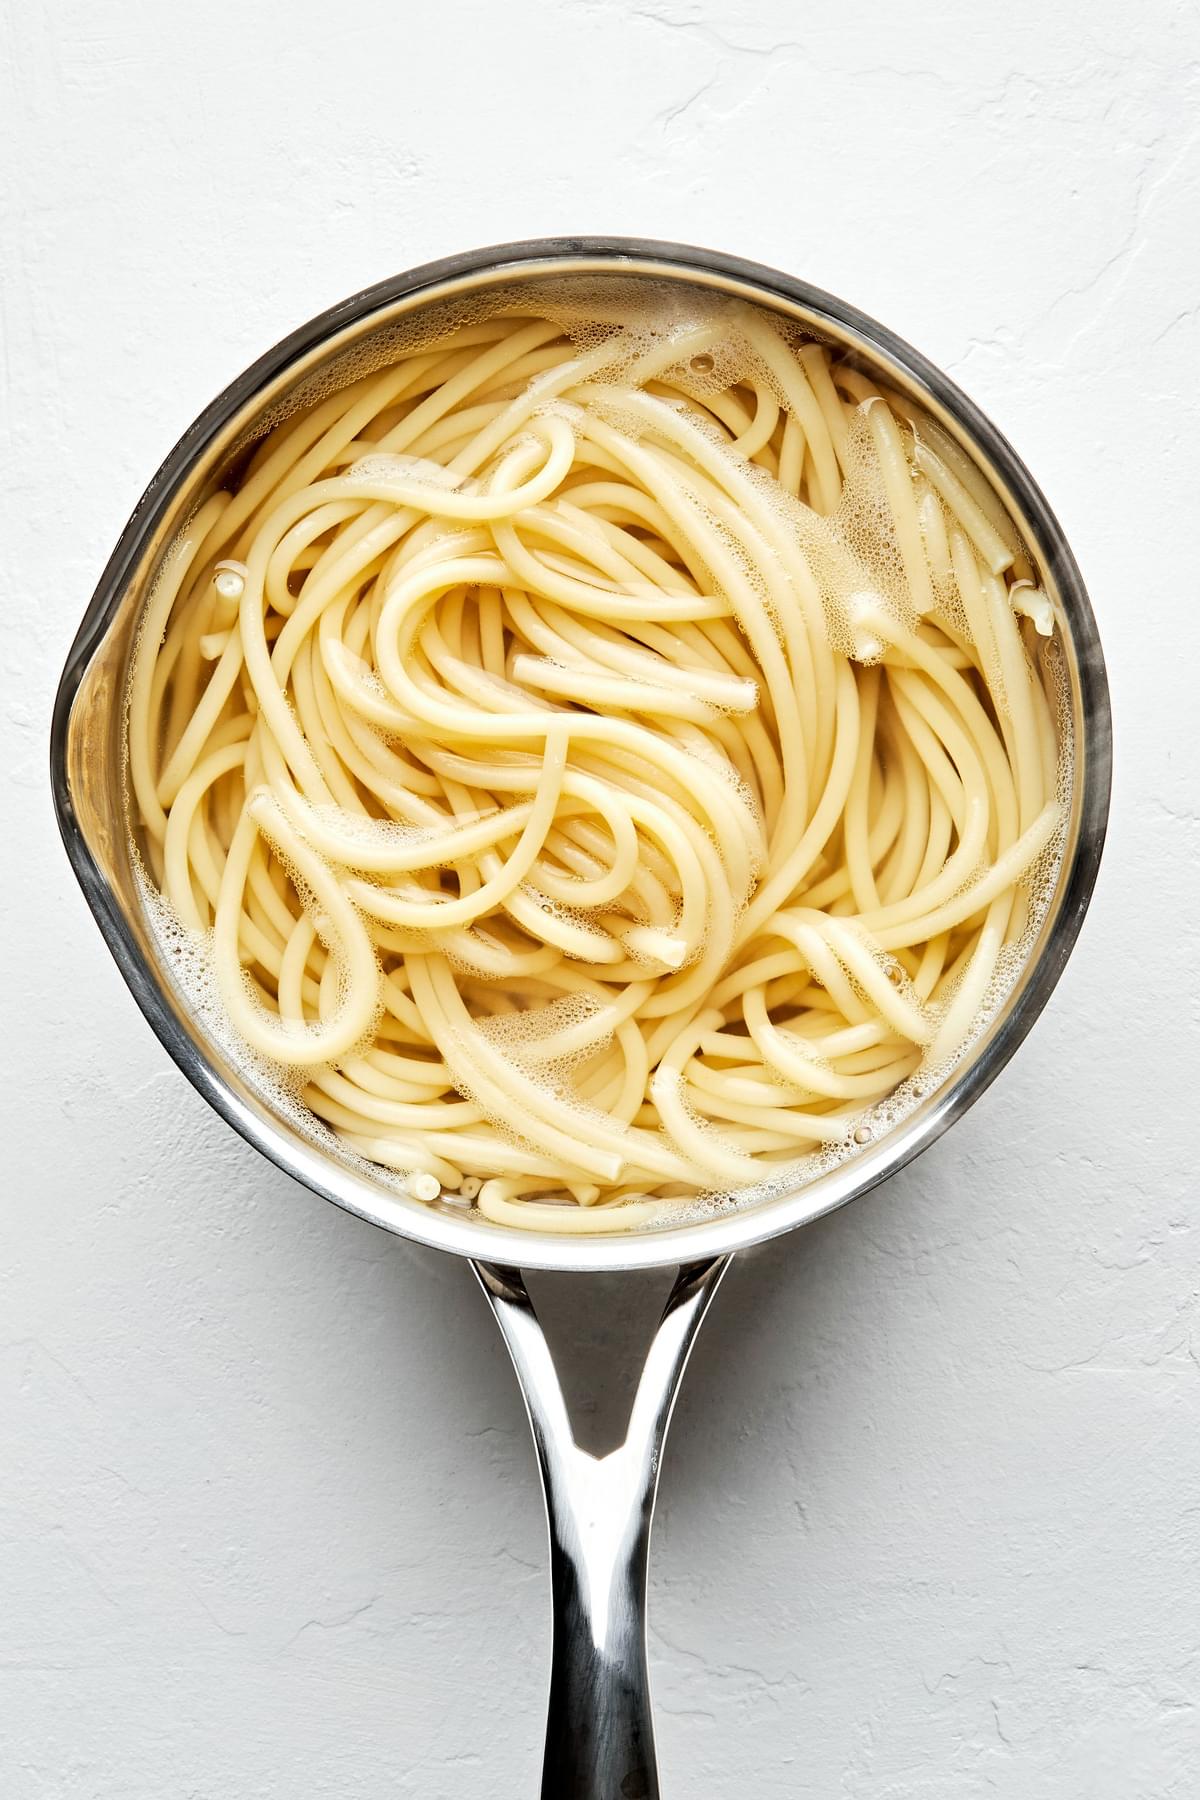 pasta noodles being cooked in salted water